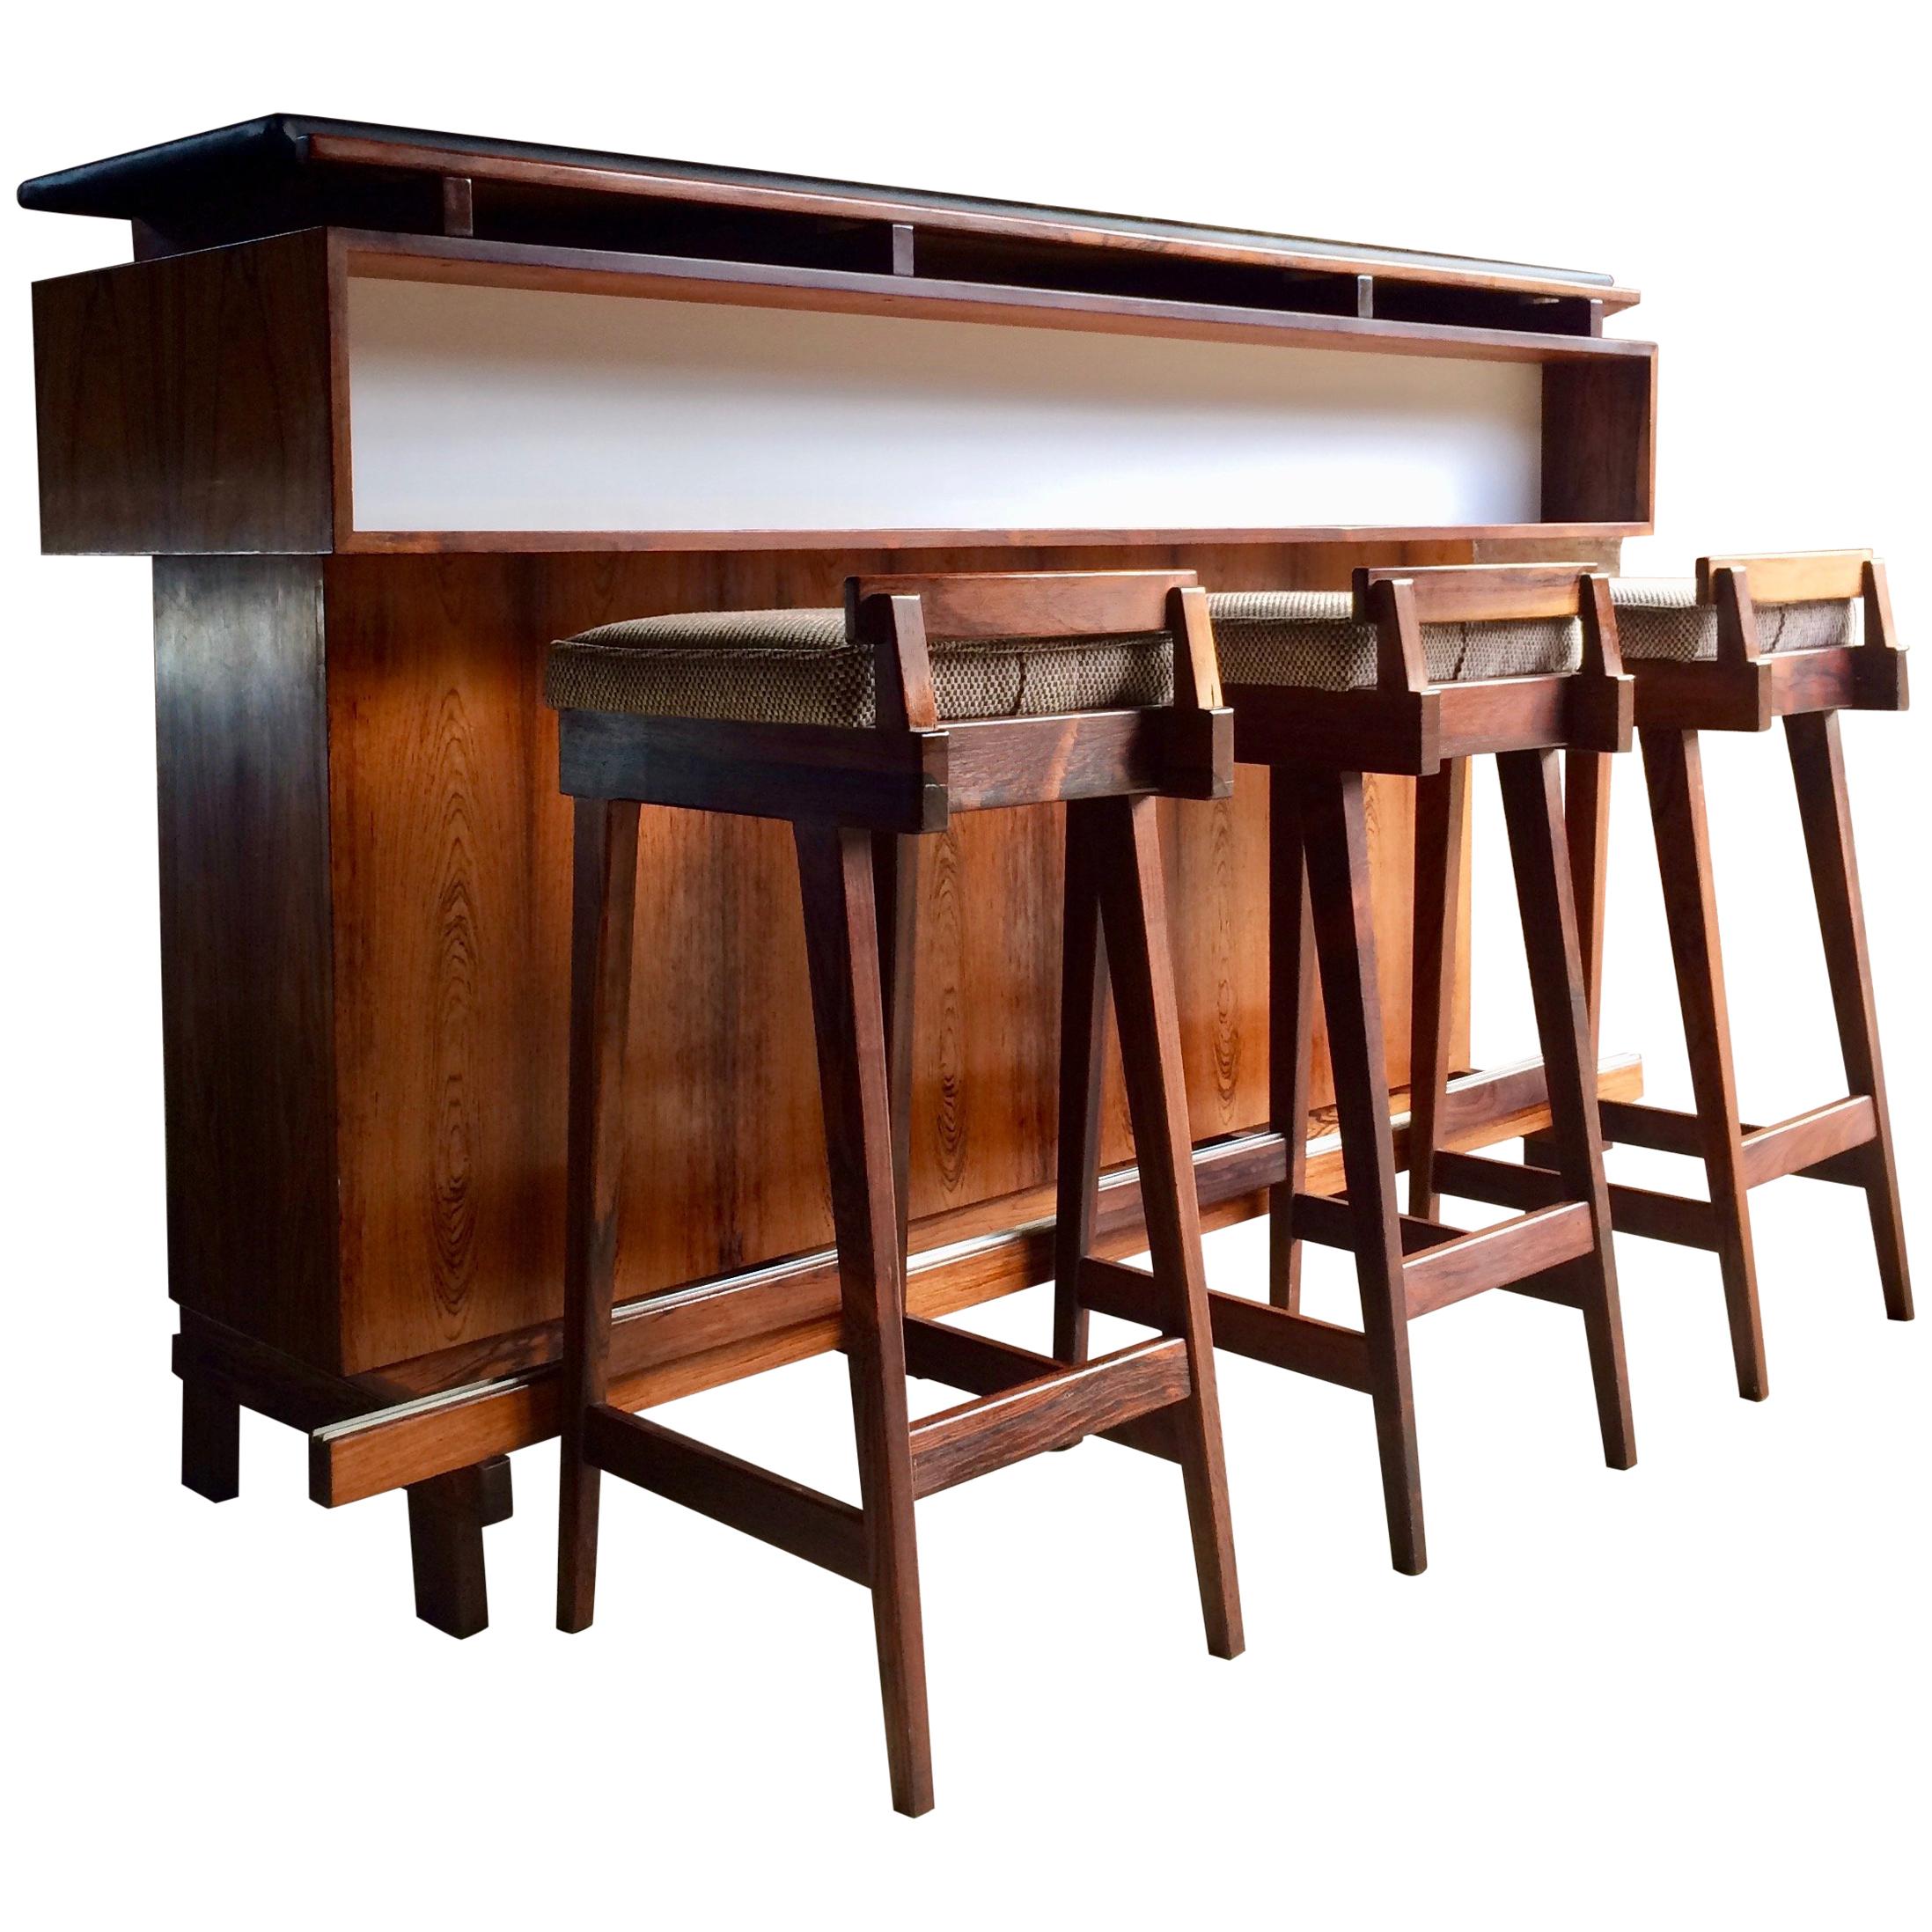 
Magnificent midcentury Danish rosewood dry bar by Erik Buch for Dyrlund Denmark, 1960s, the front side of the bar has a recessed white laminate accented shelf with a wonderful full width rosewood frontage with a long solid rosewood and metal